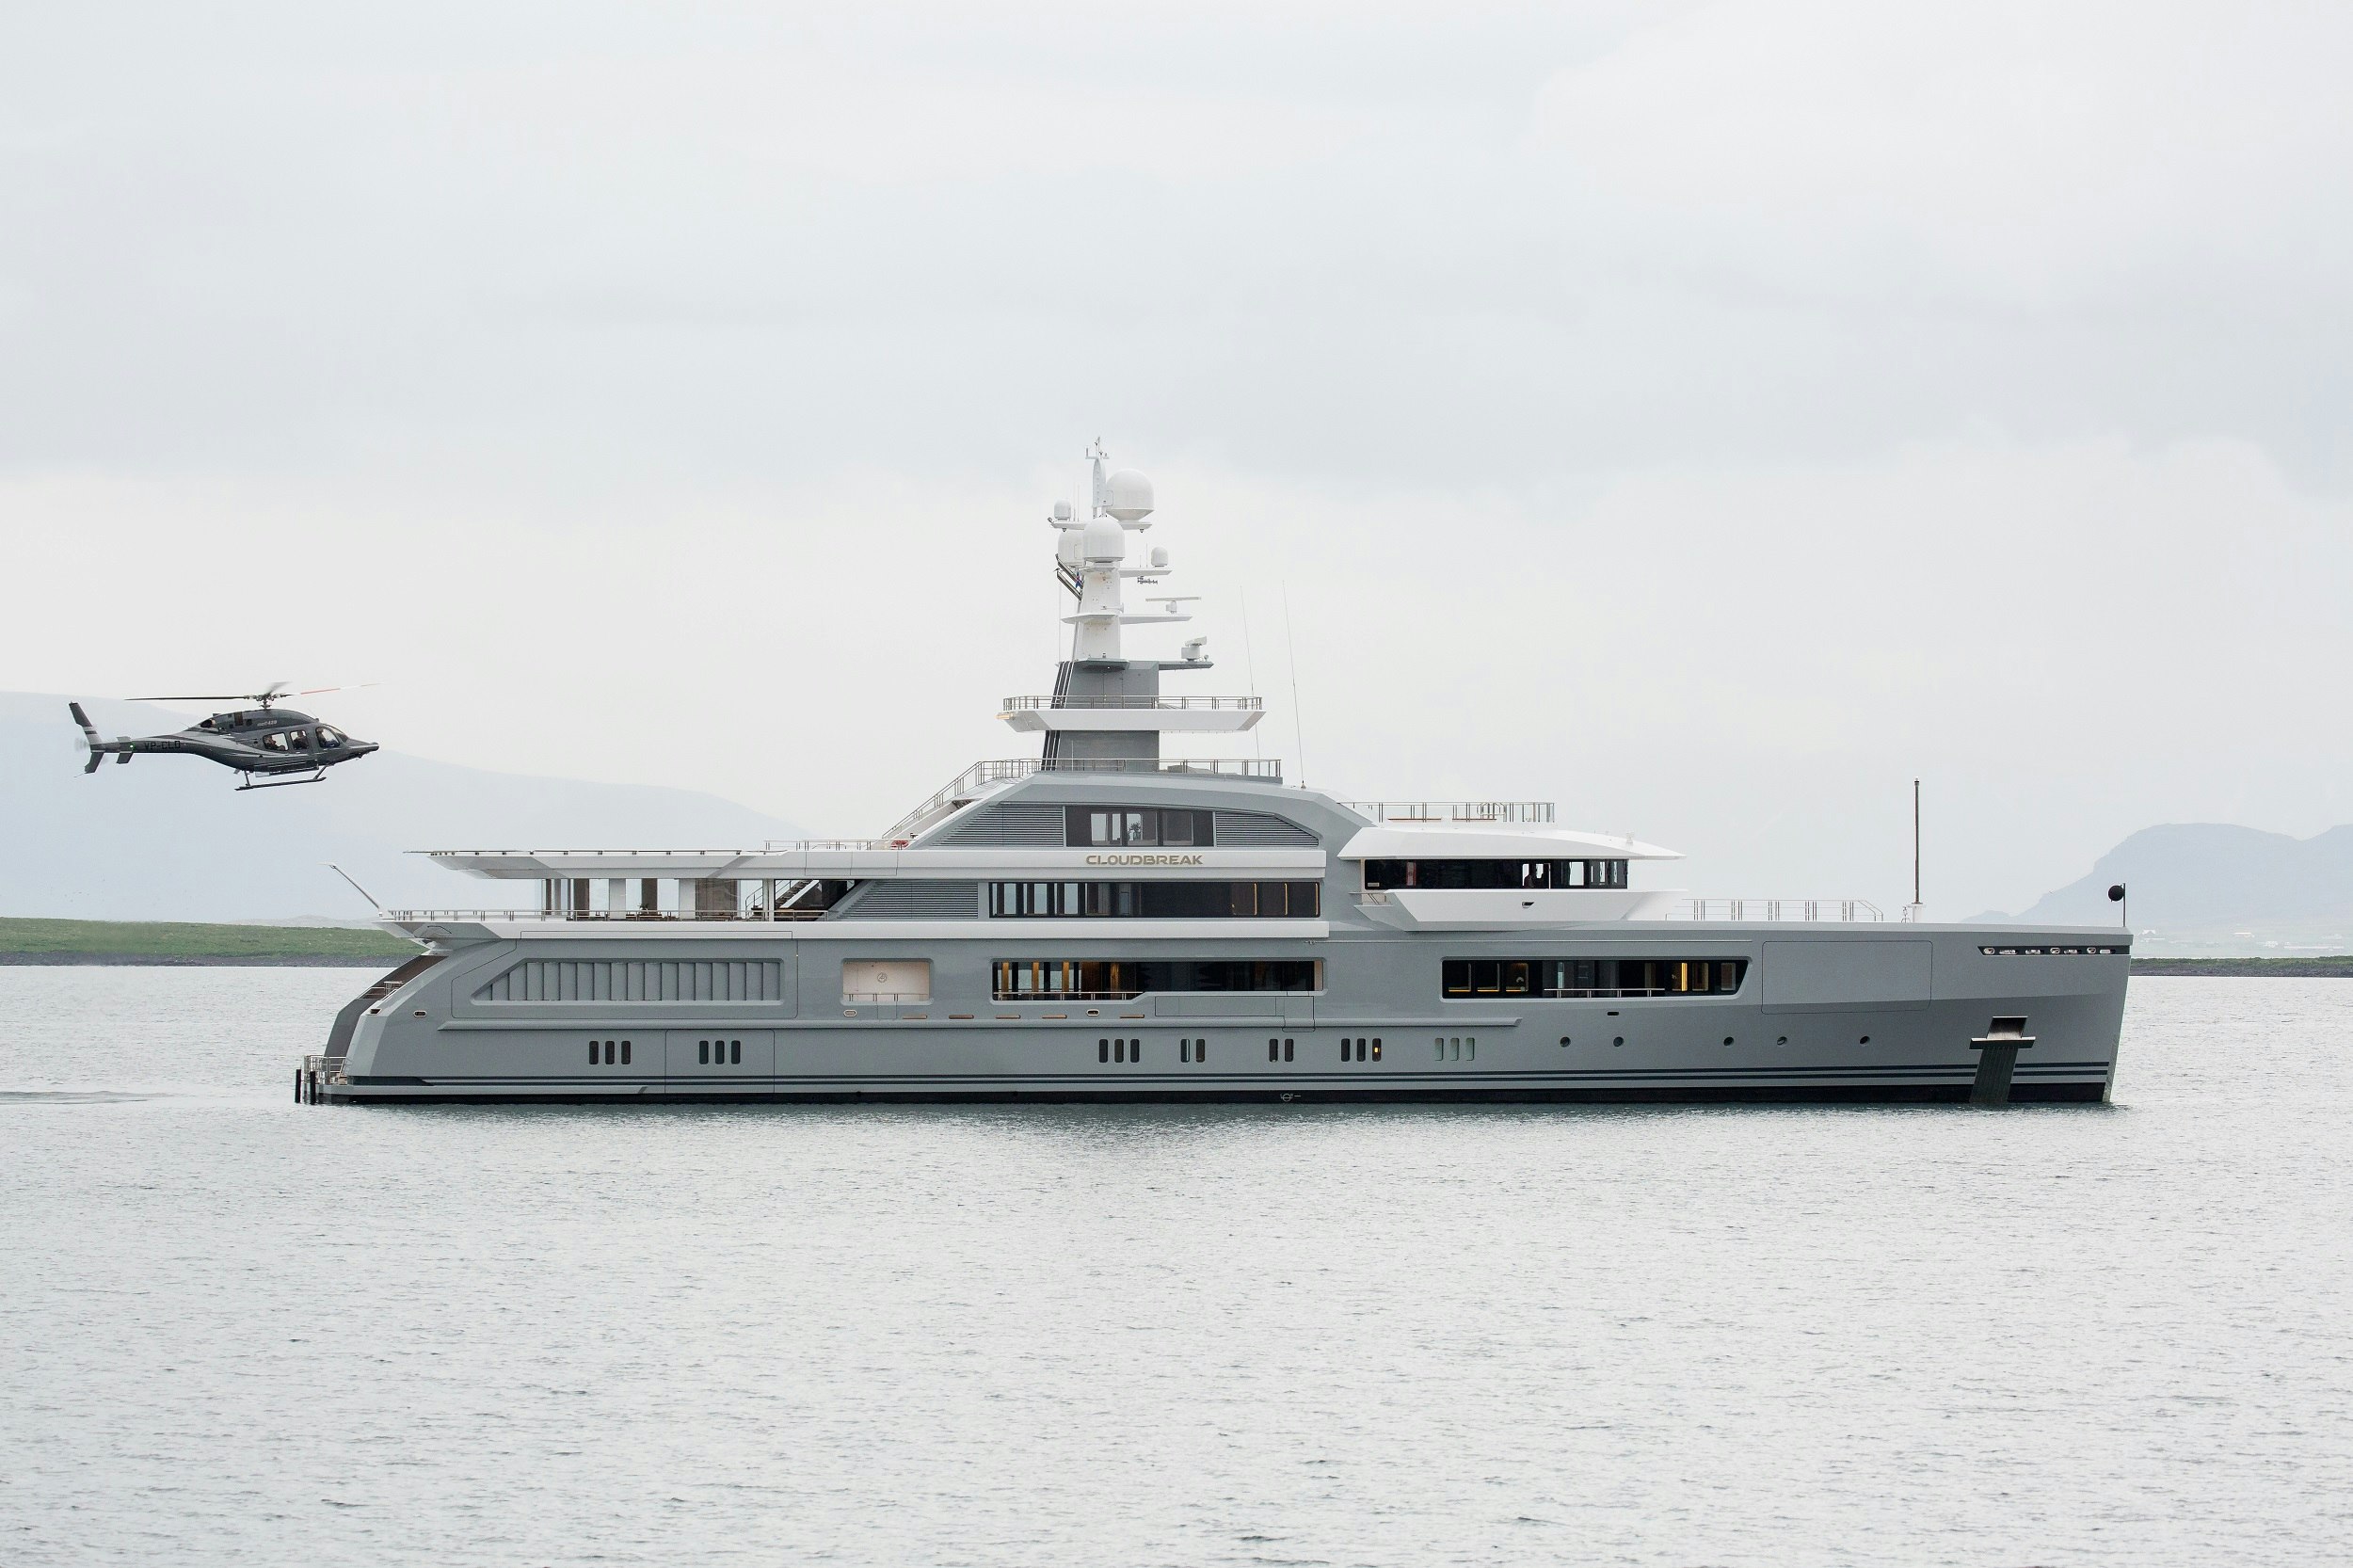 A helicopter coming in to land on the back of a large private yacht